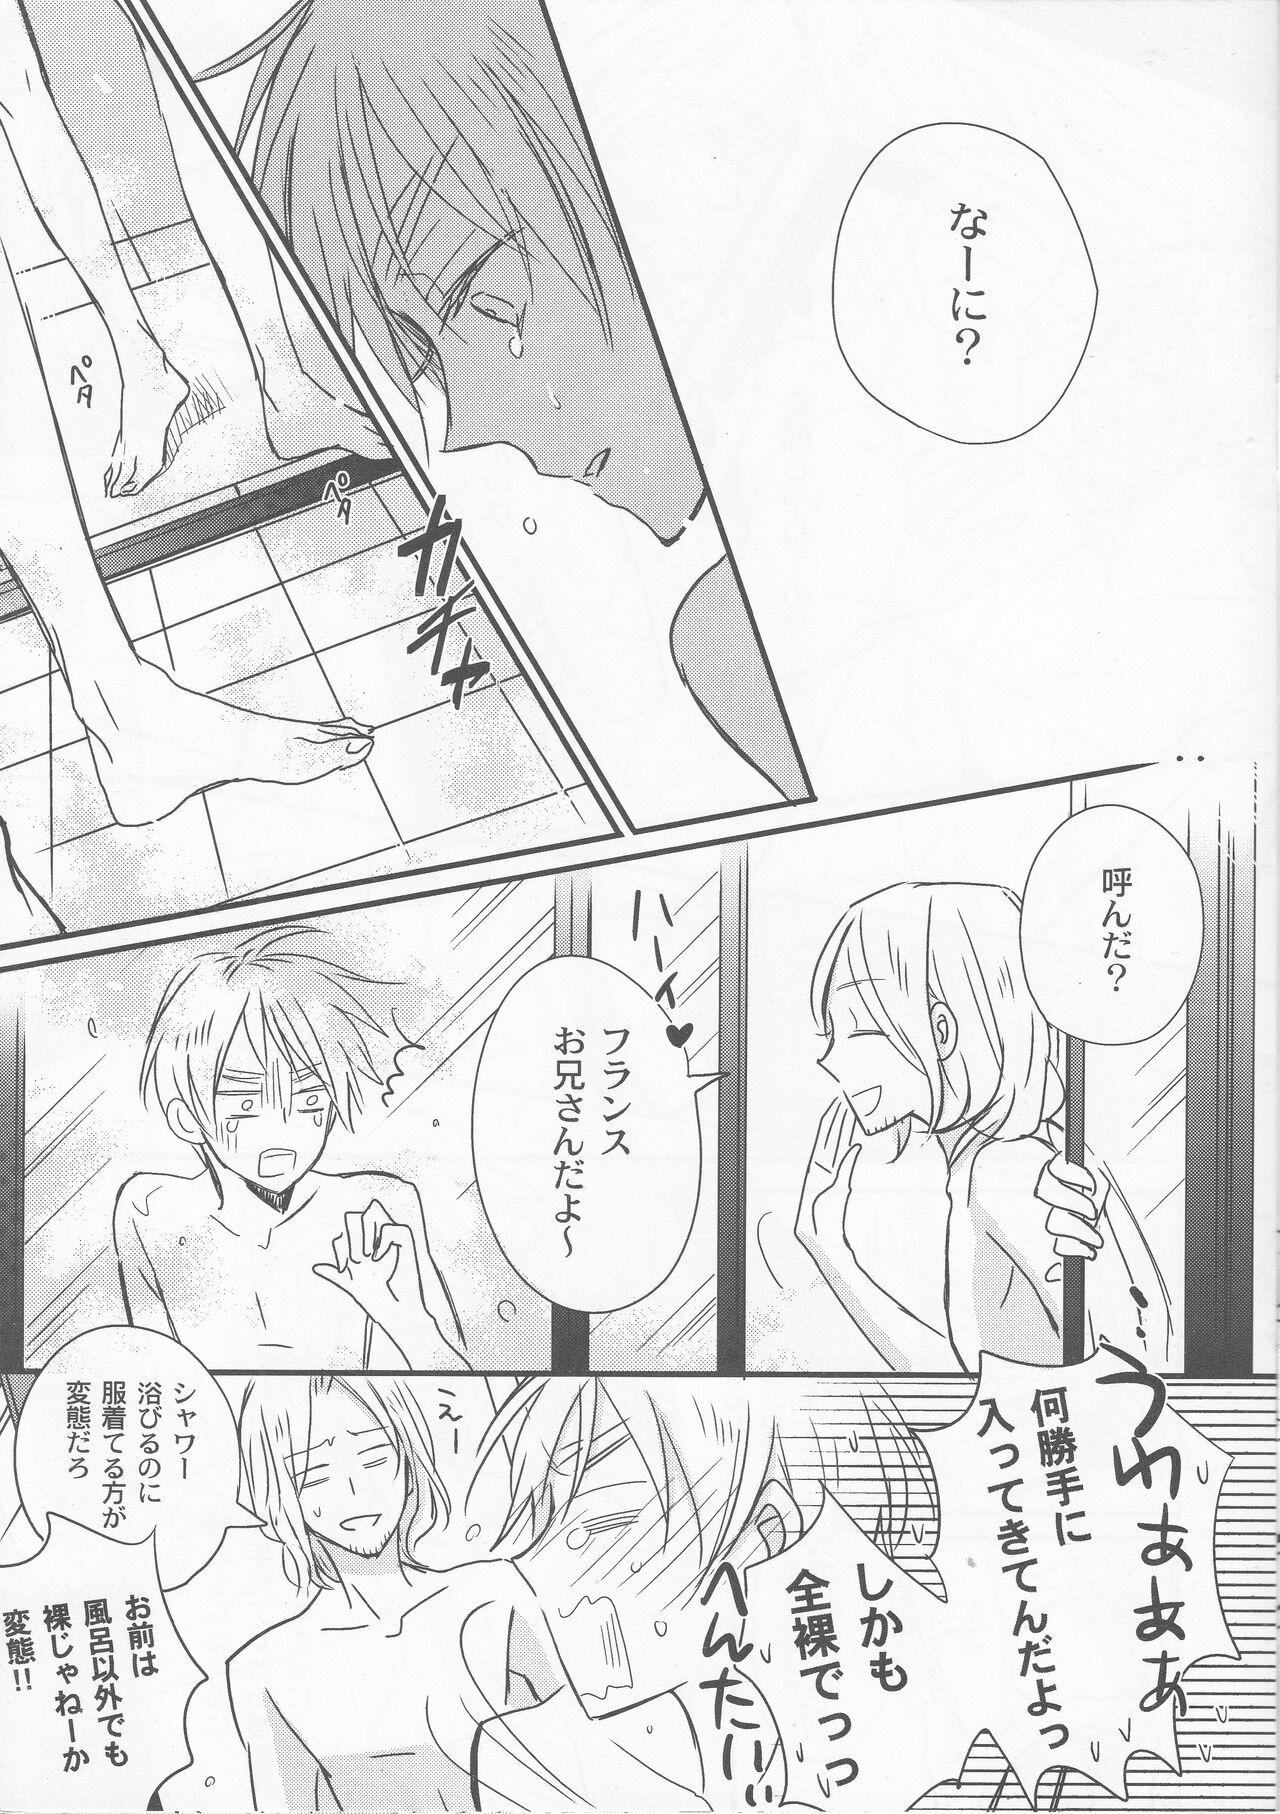 Gay unknown title - Axis powers hetalia Spanish - Page 8